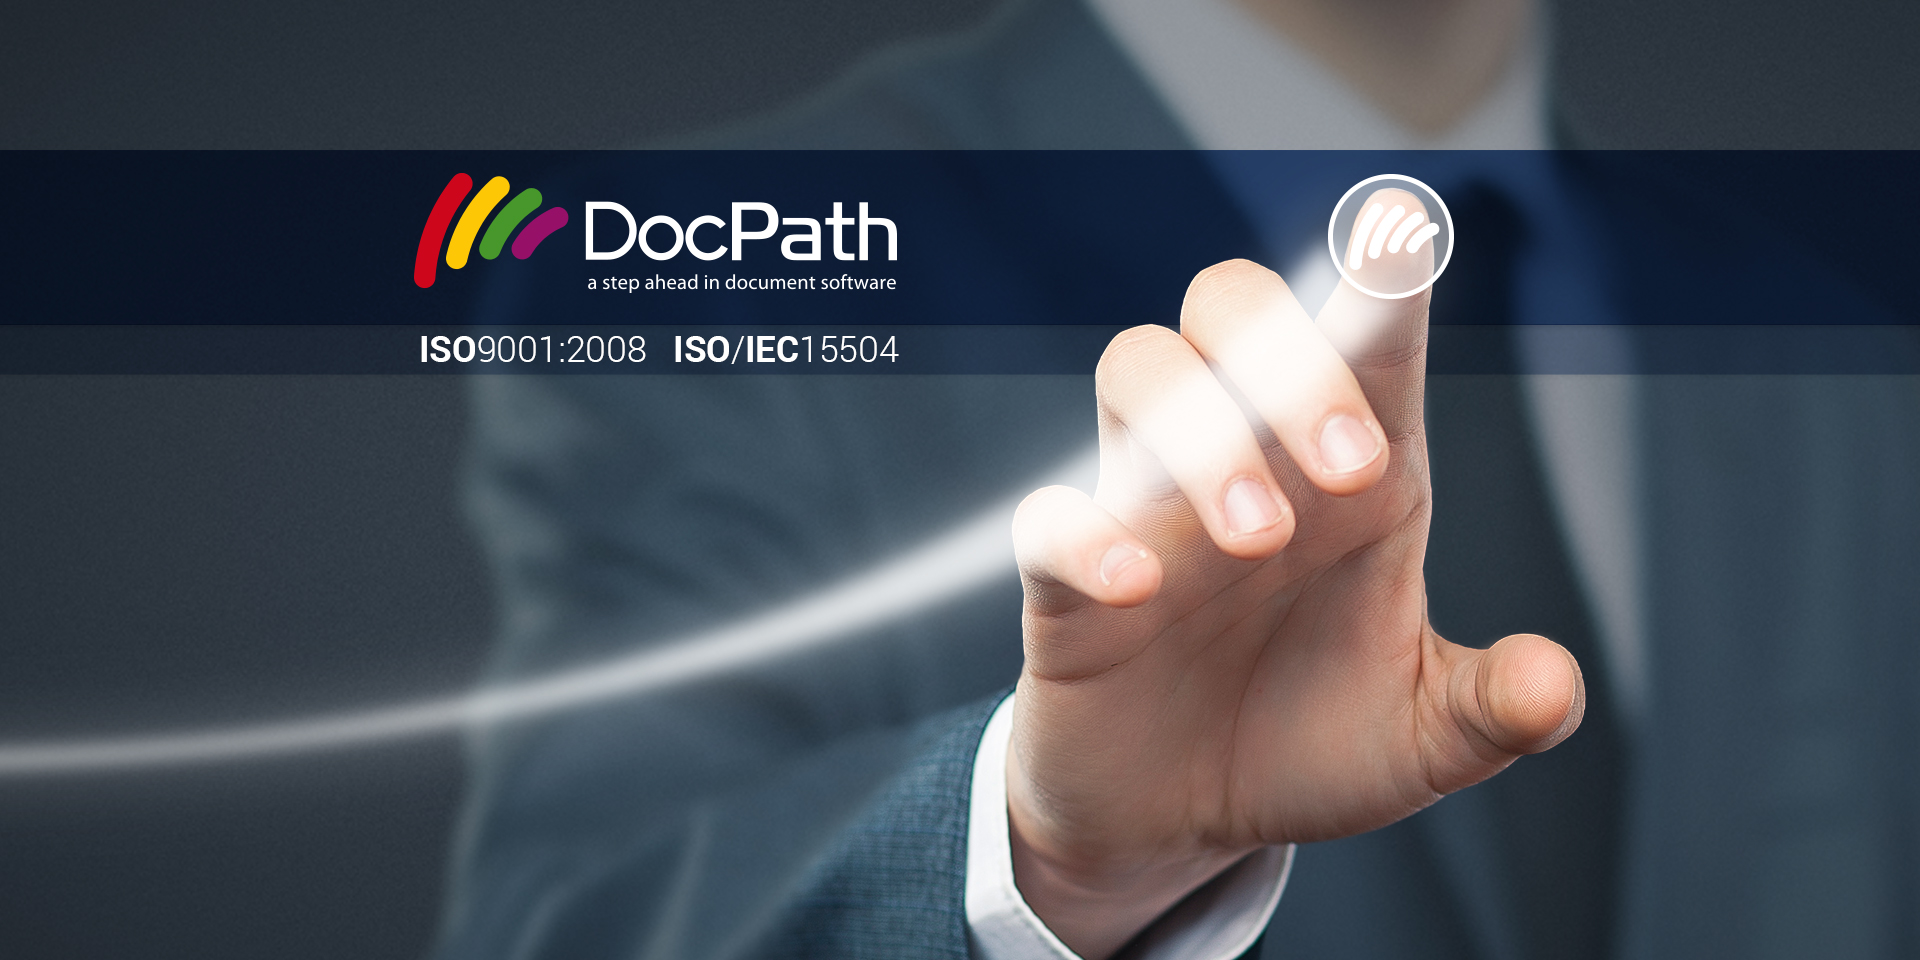 DocPath Certifies Again to ISO:2008 and ISO/IEC 15504 Quality Standards